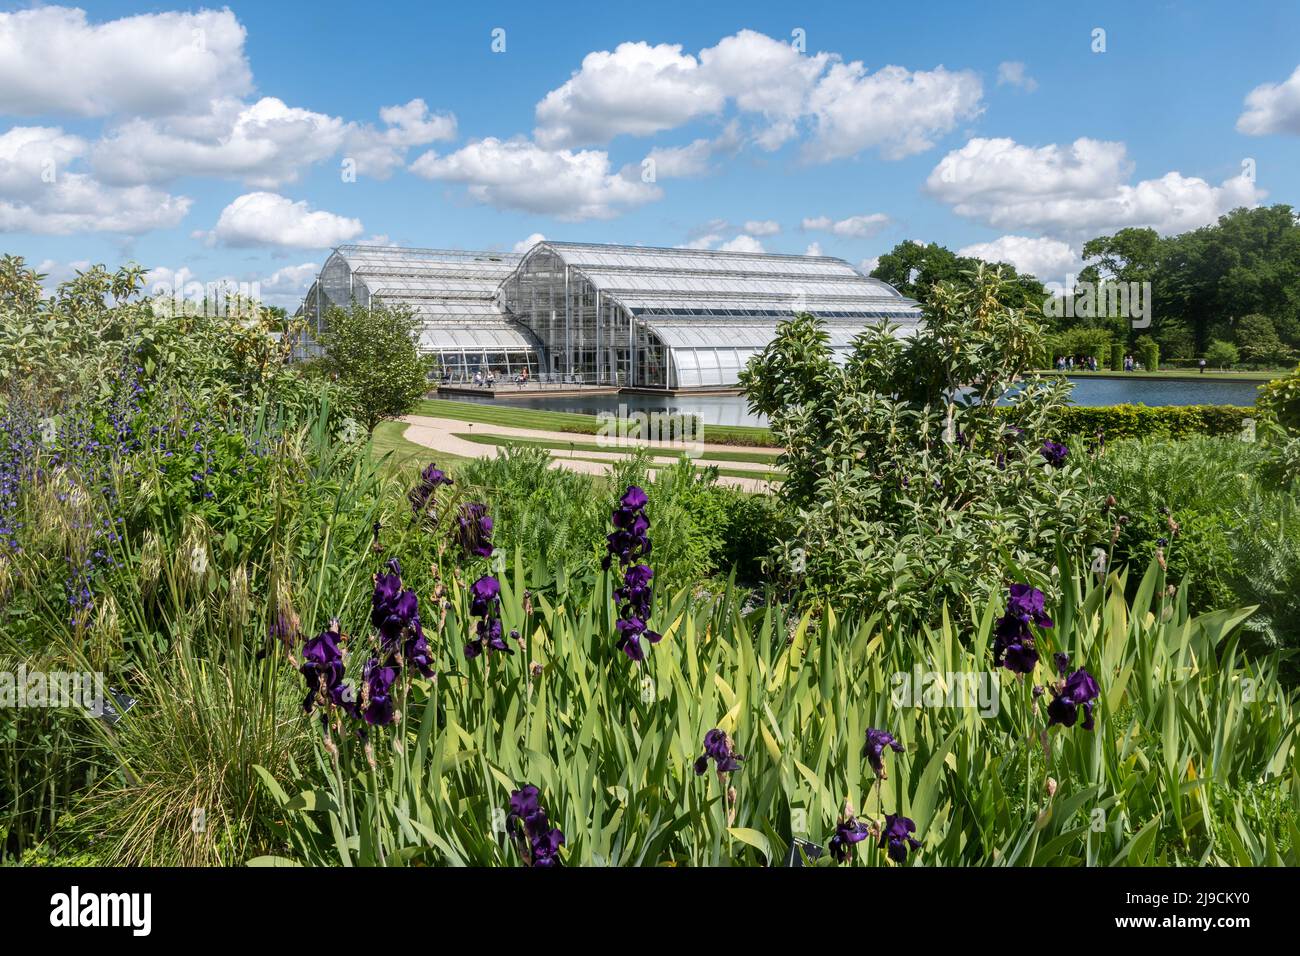 View of the glasshouse in RHS Wisley Garden during May, Surrey, England, UK, with purple irises in flower Stock Photo